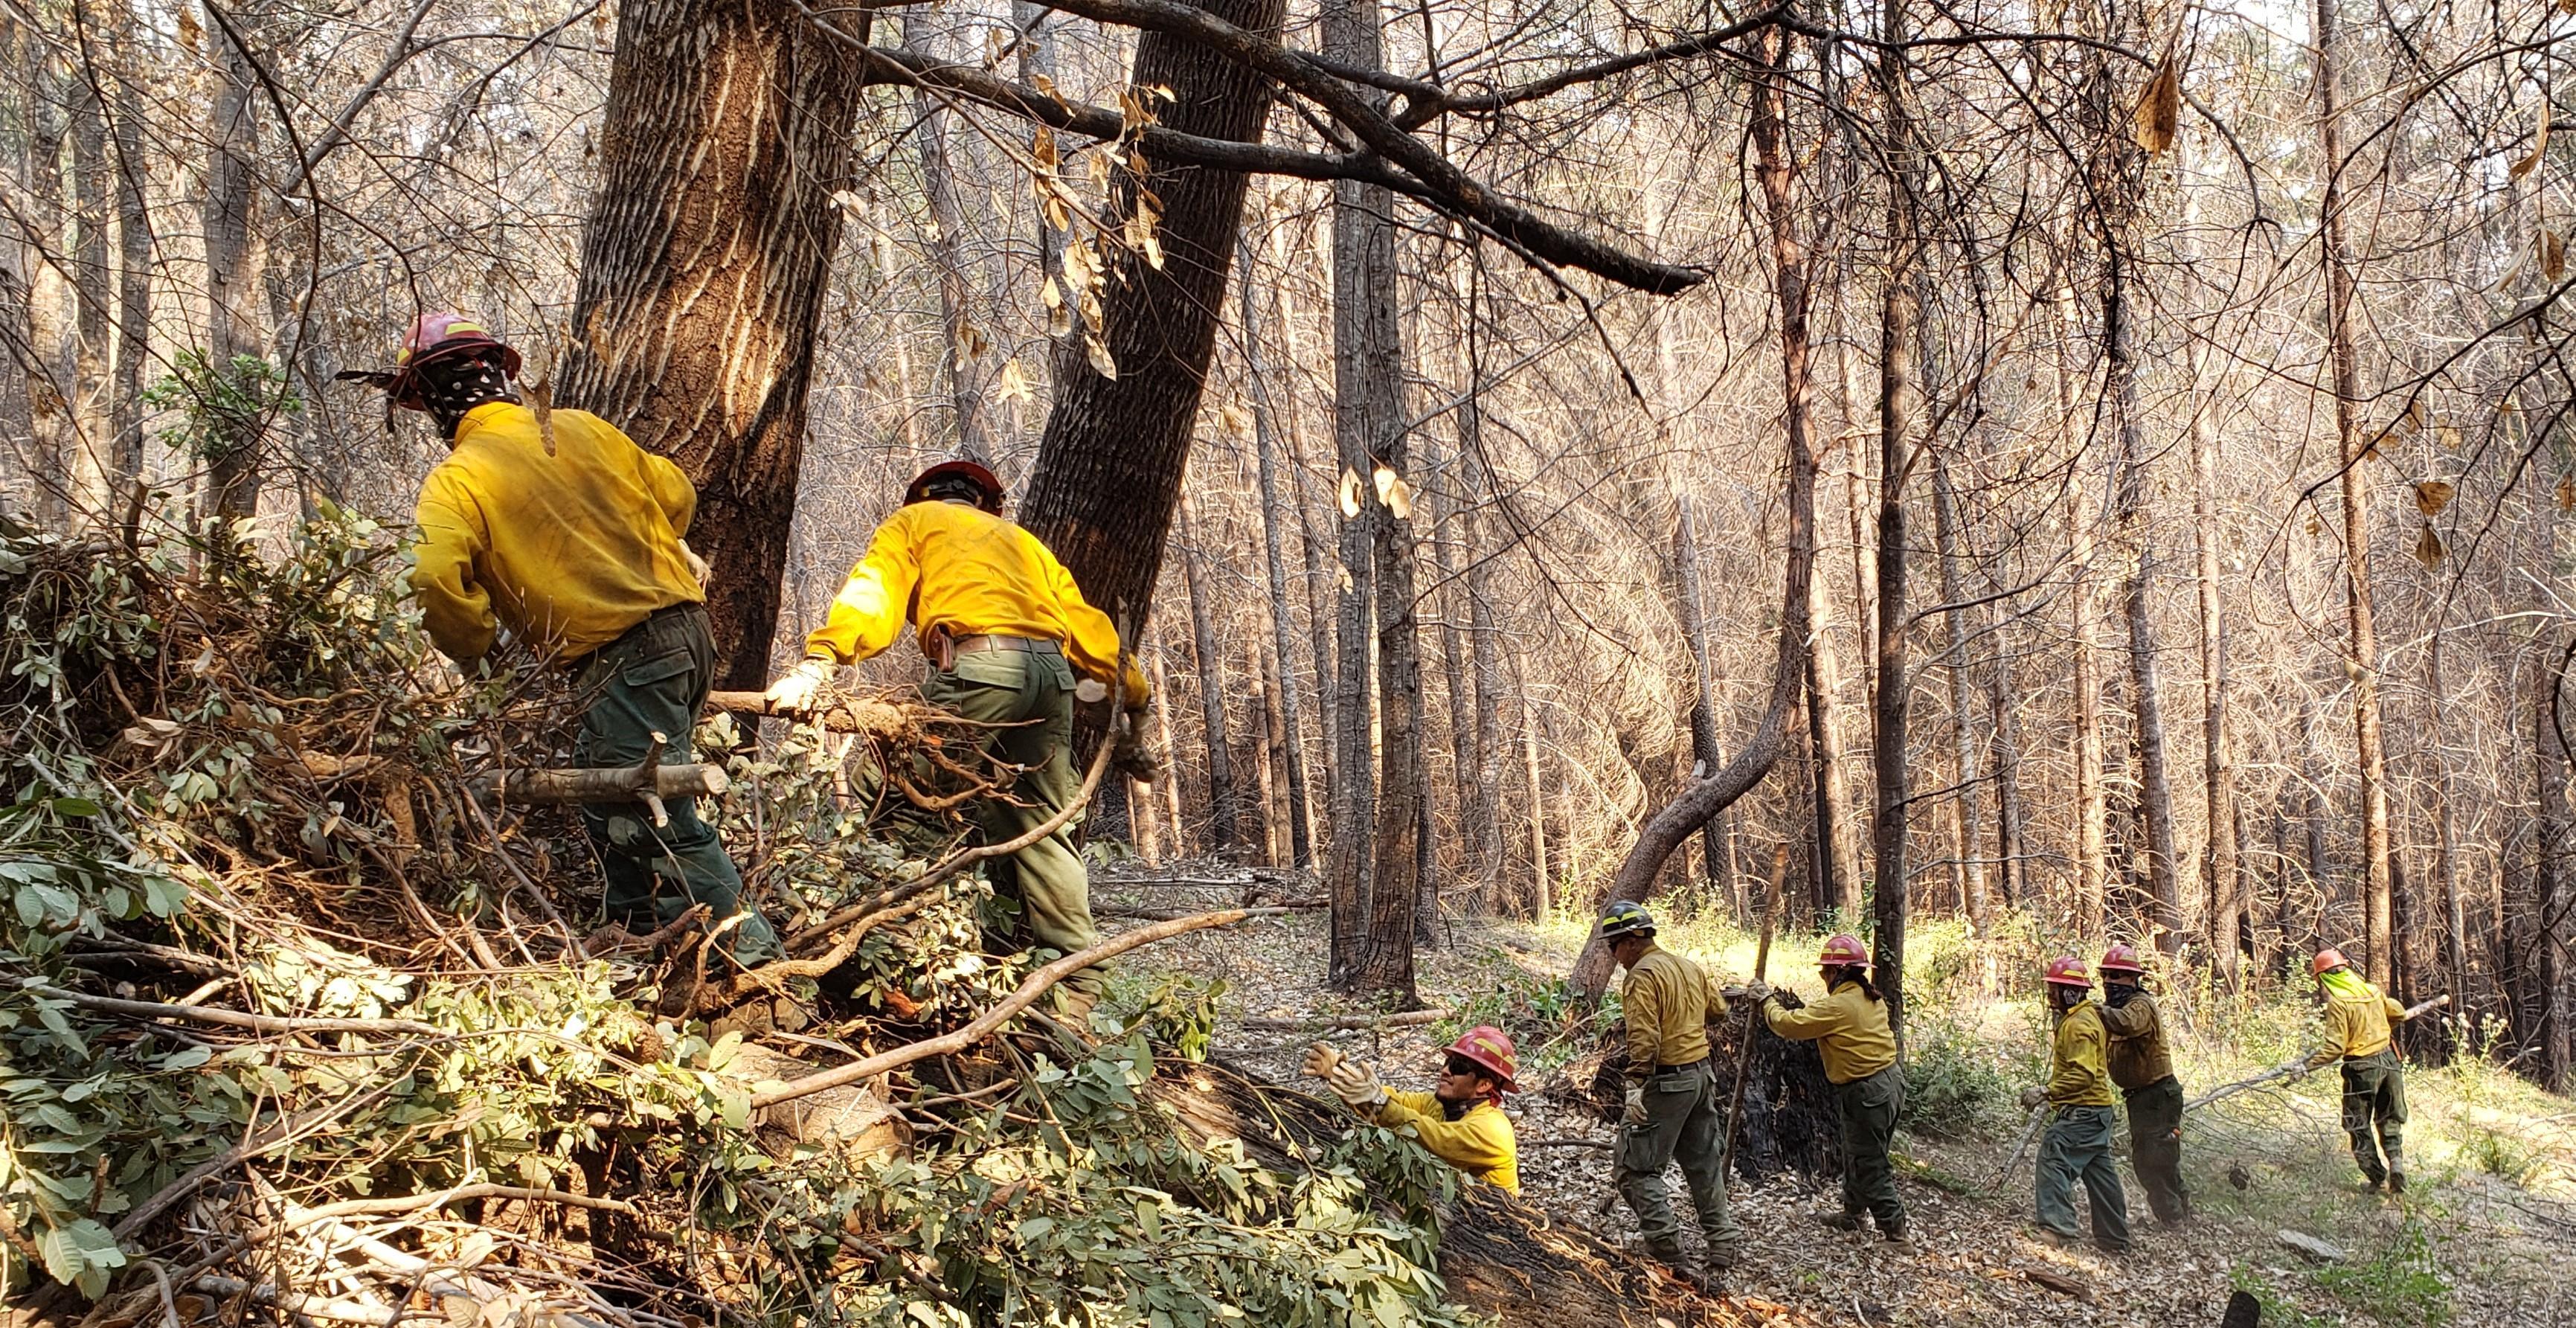 A group of people in wildland gear and red helmets standing in a line, passing brush and branches to each other in a forest